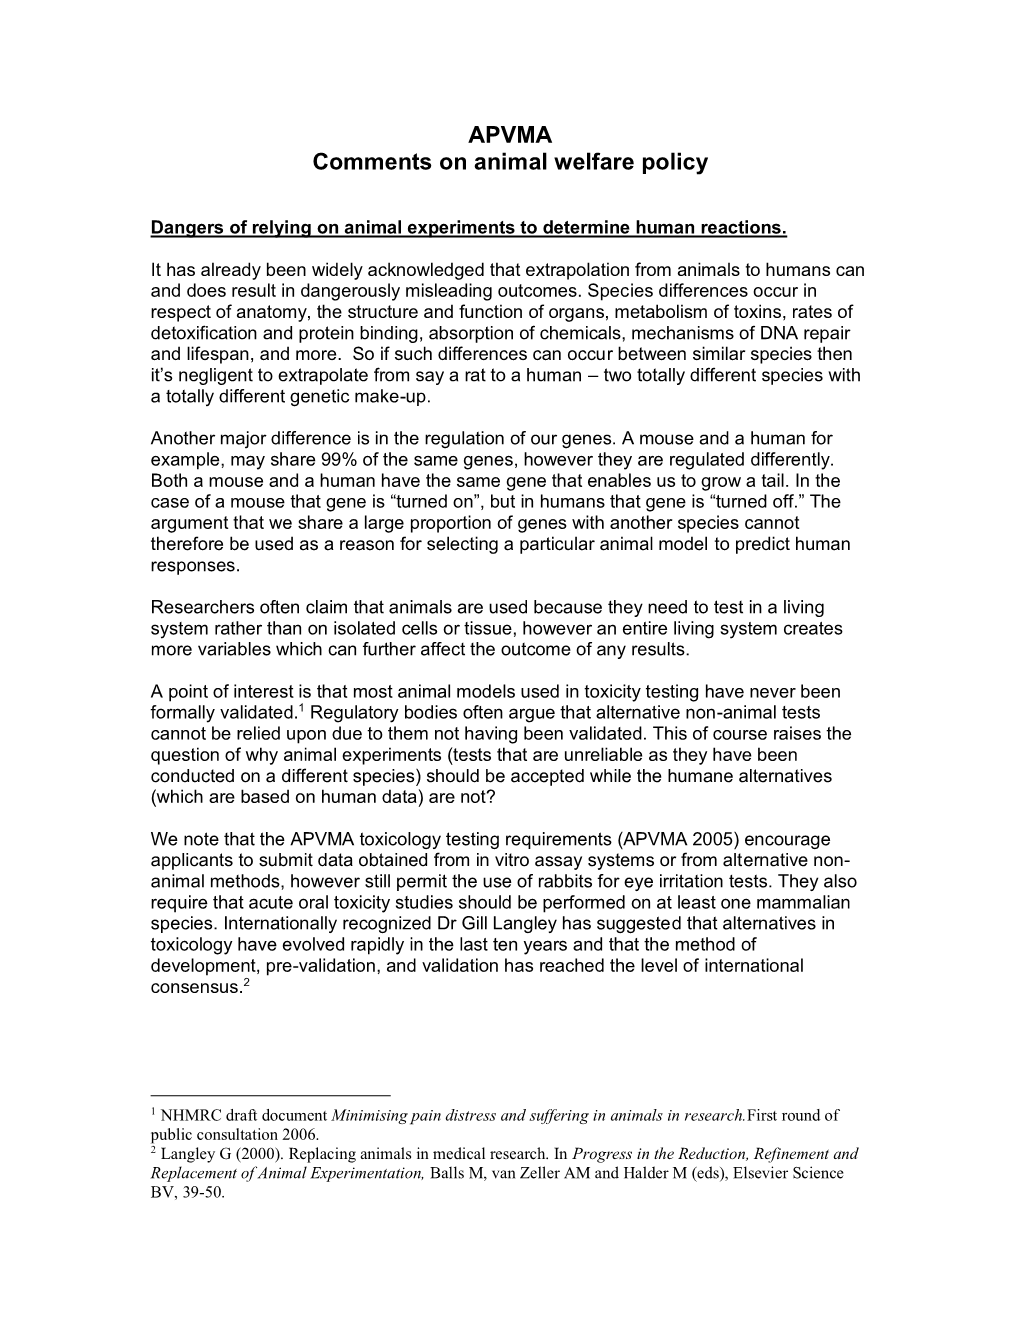 APVMA Comments on Animal Welfare Policy